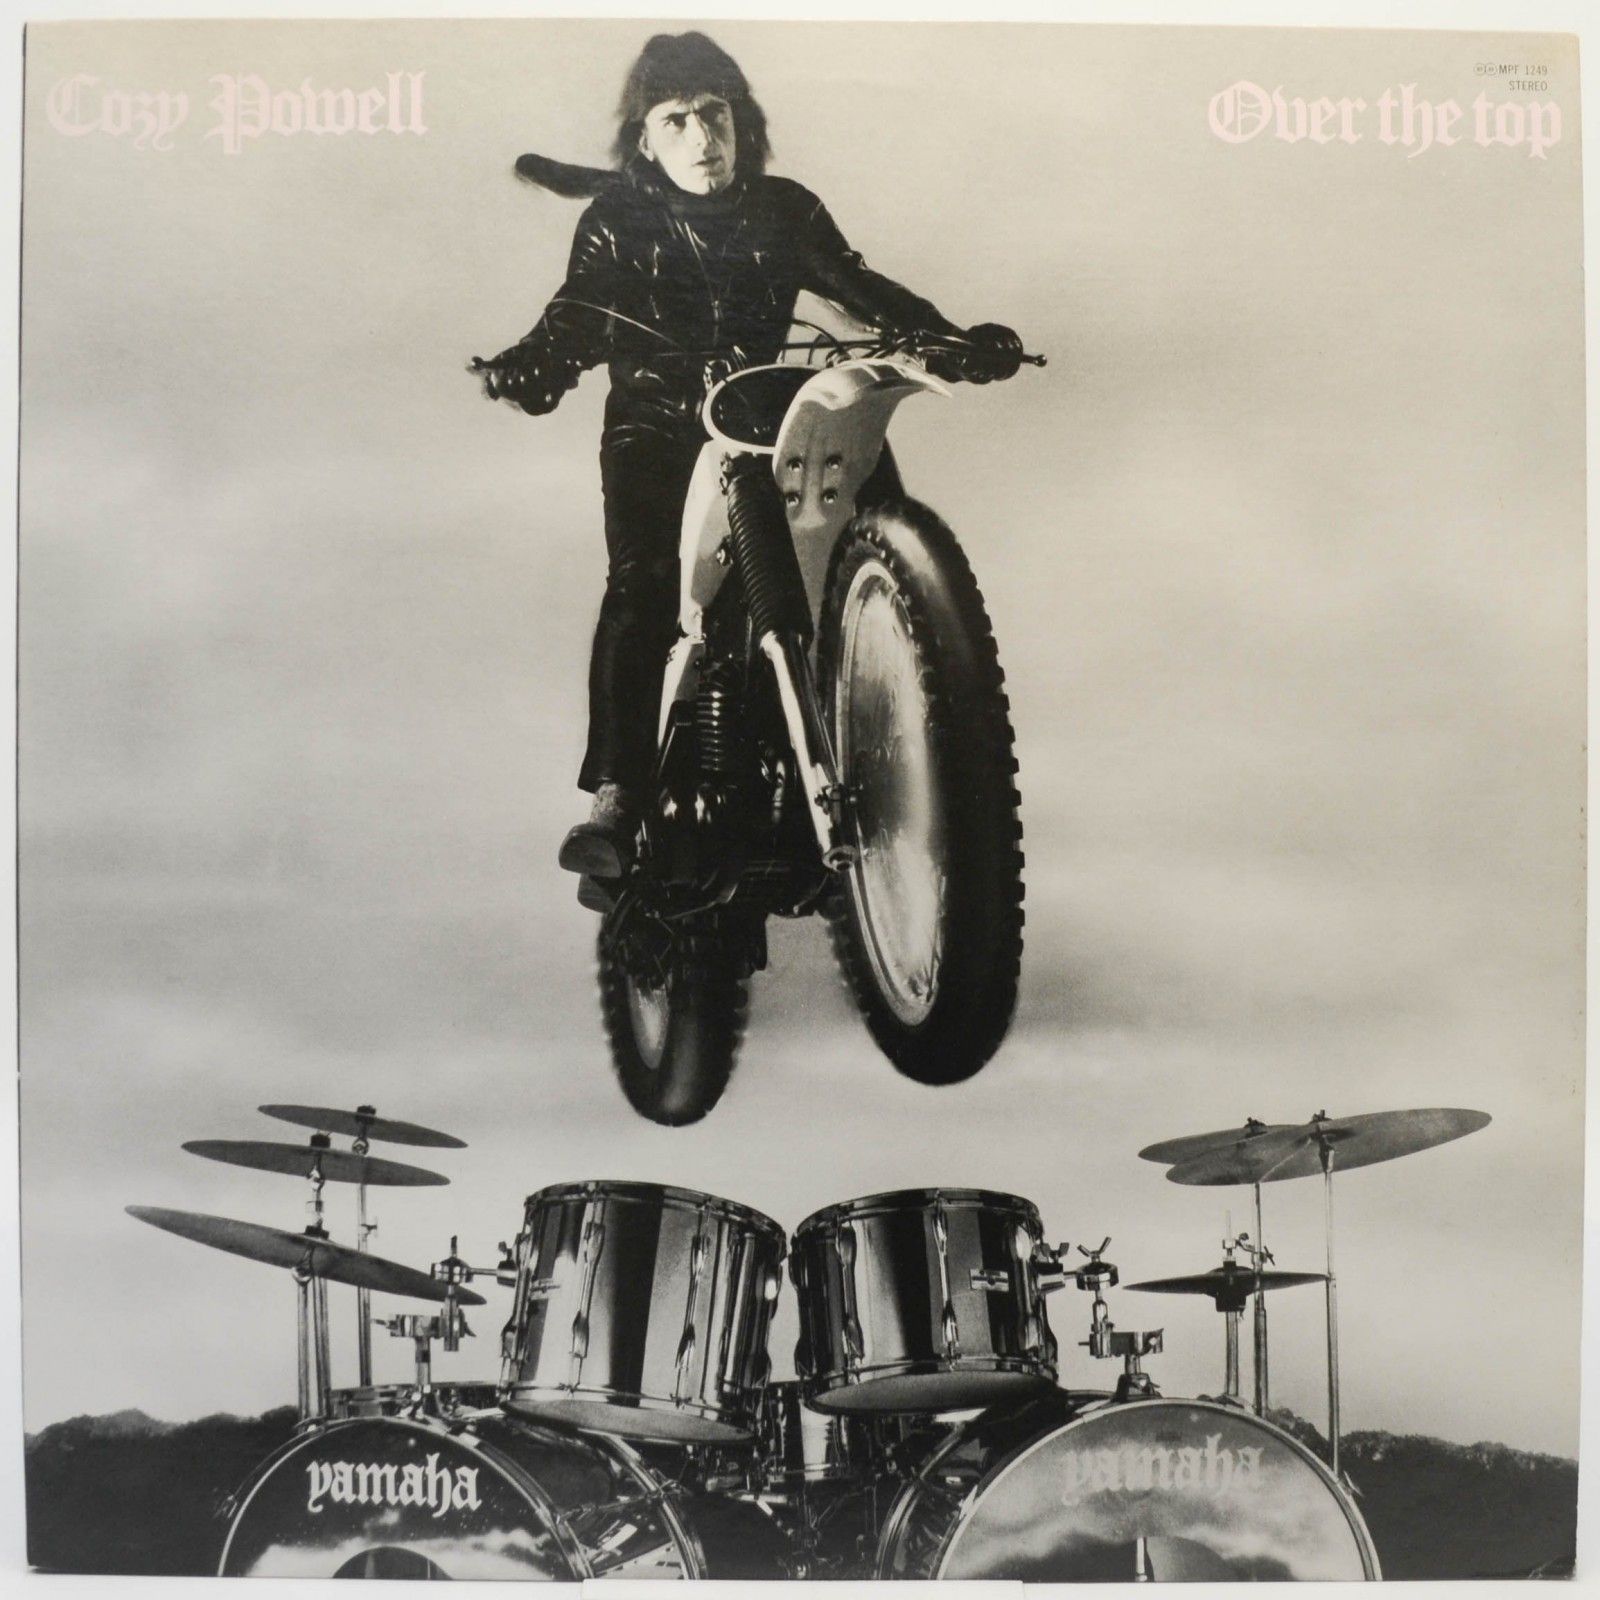 Cozy Powell — Over The Top, 1979